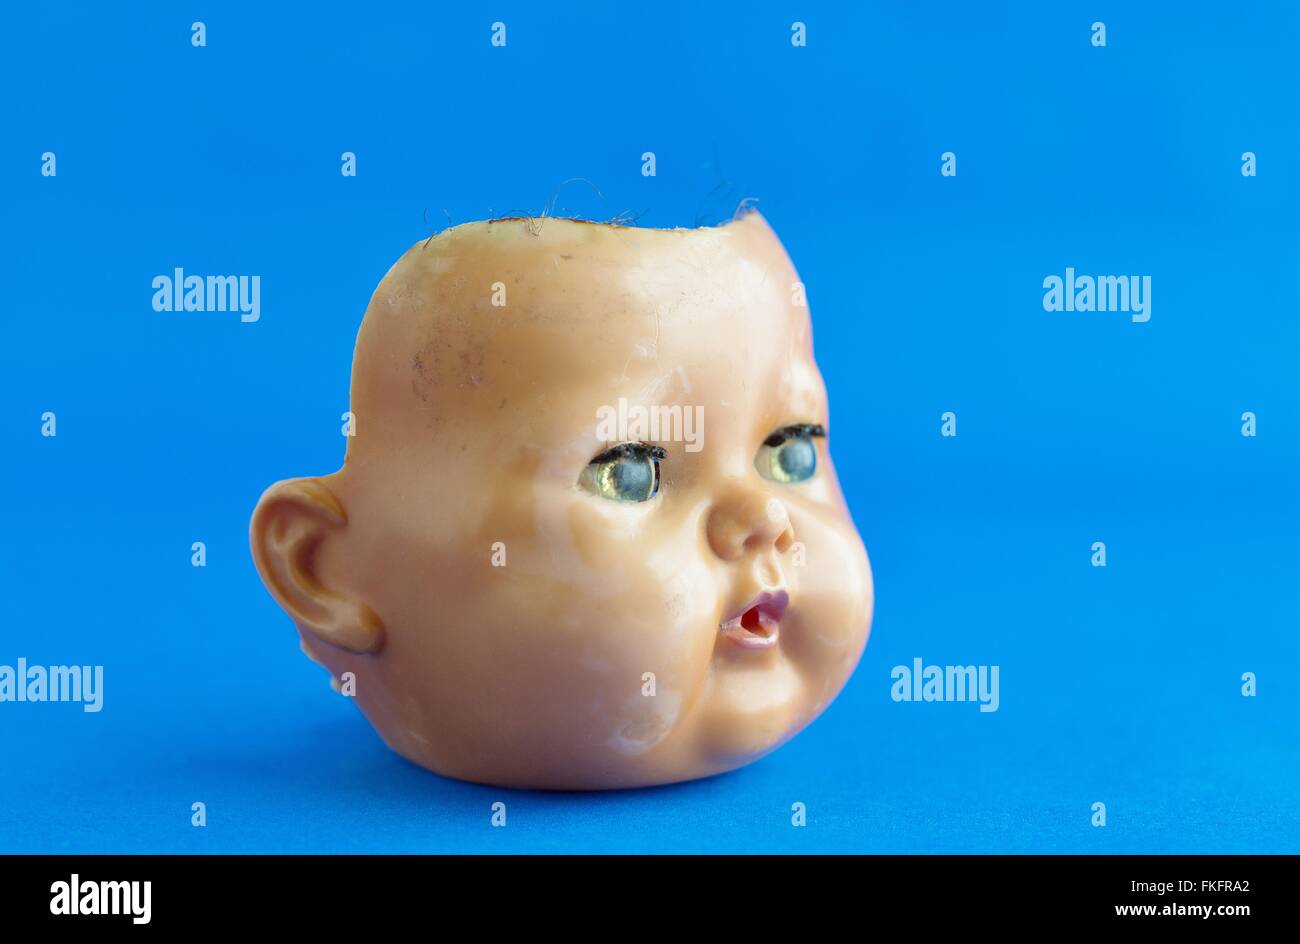 The face of a creepy old doll. Stock Photo